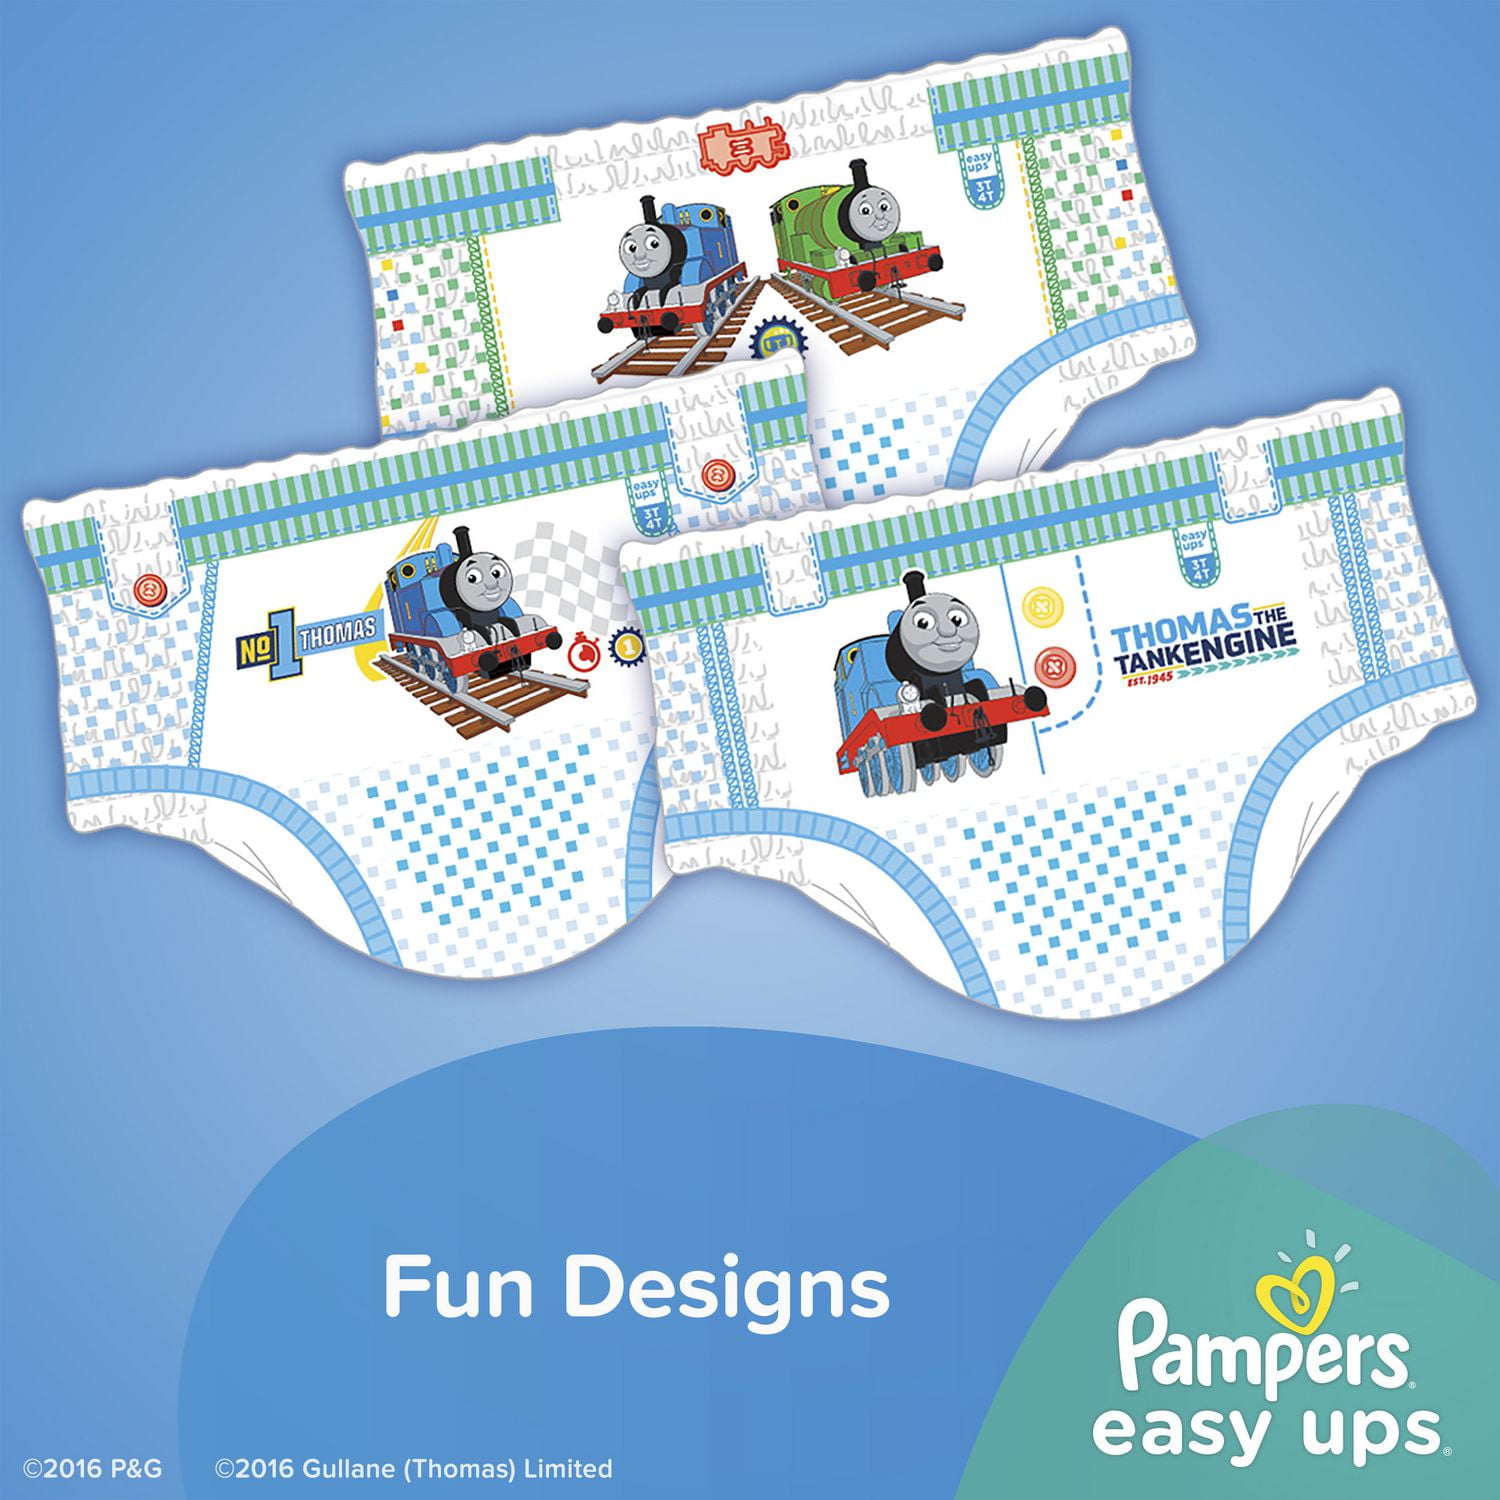 Pampers Easy Ups Training Underwear for Boys, Giant Pack, Sizes 2T